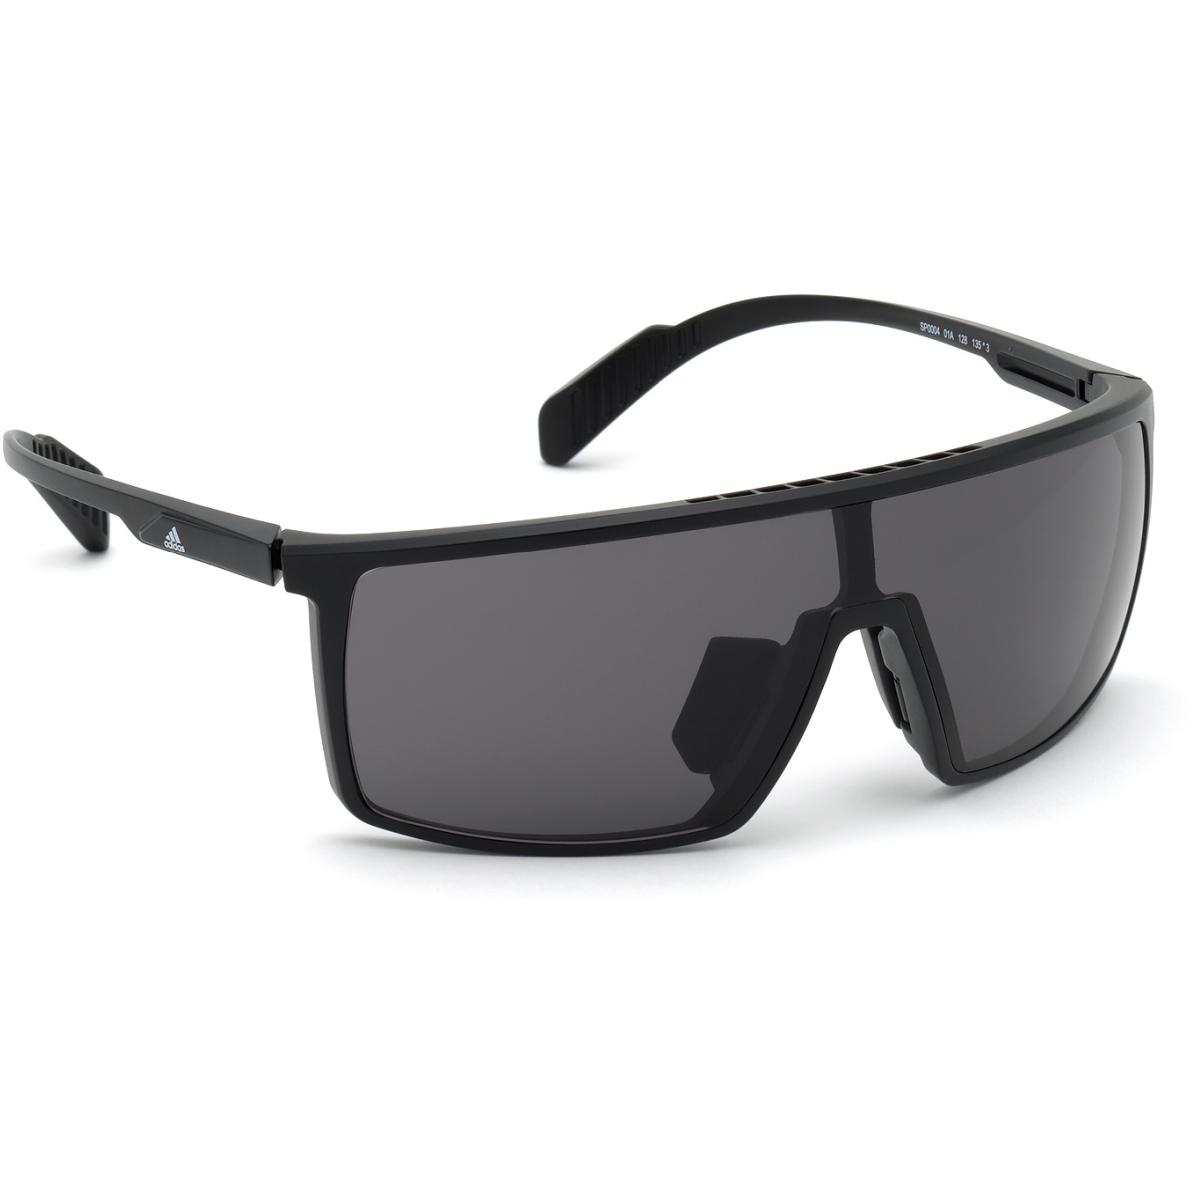 Image of adidas Sp0004 Injected Sports Sunglasses - Shiny Black / Contrast Grey